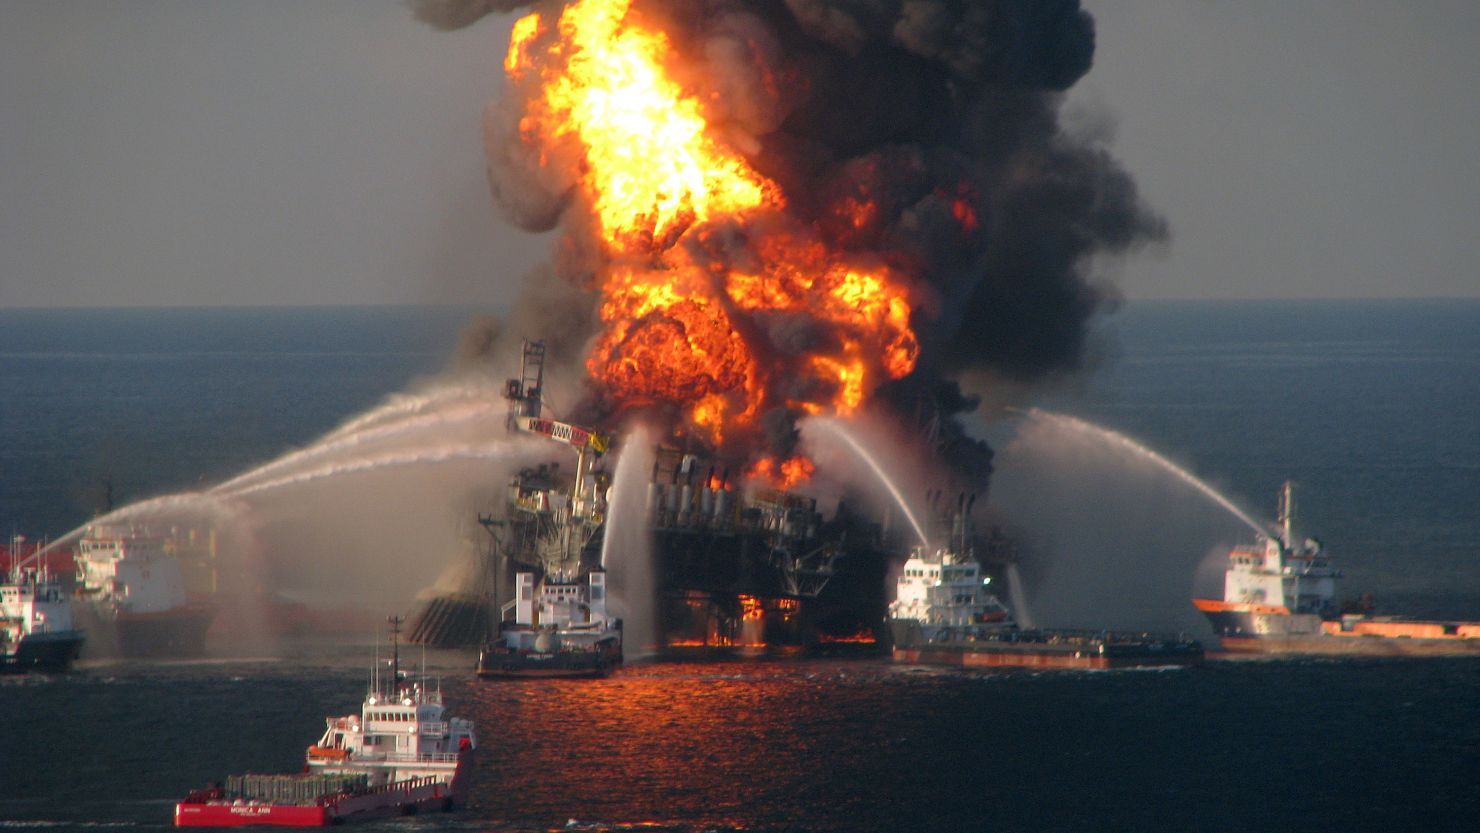 The state of Florida filed a lawsuit over the April 21, 2010, Deepwater Horizon oil spill.